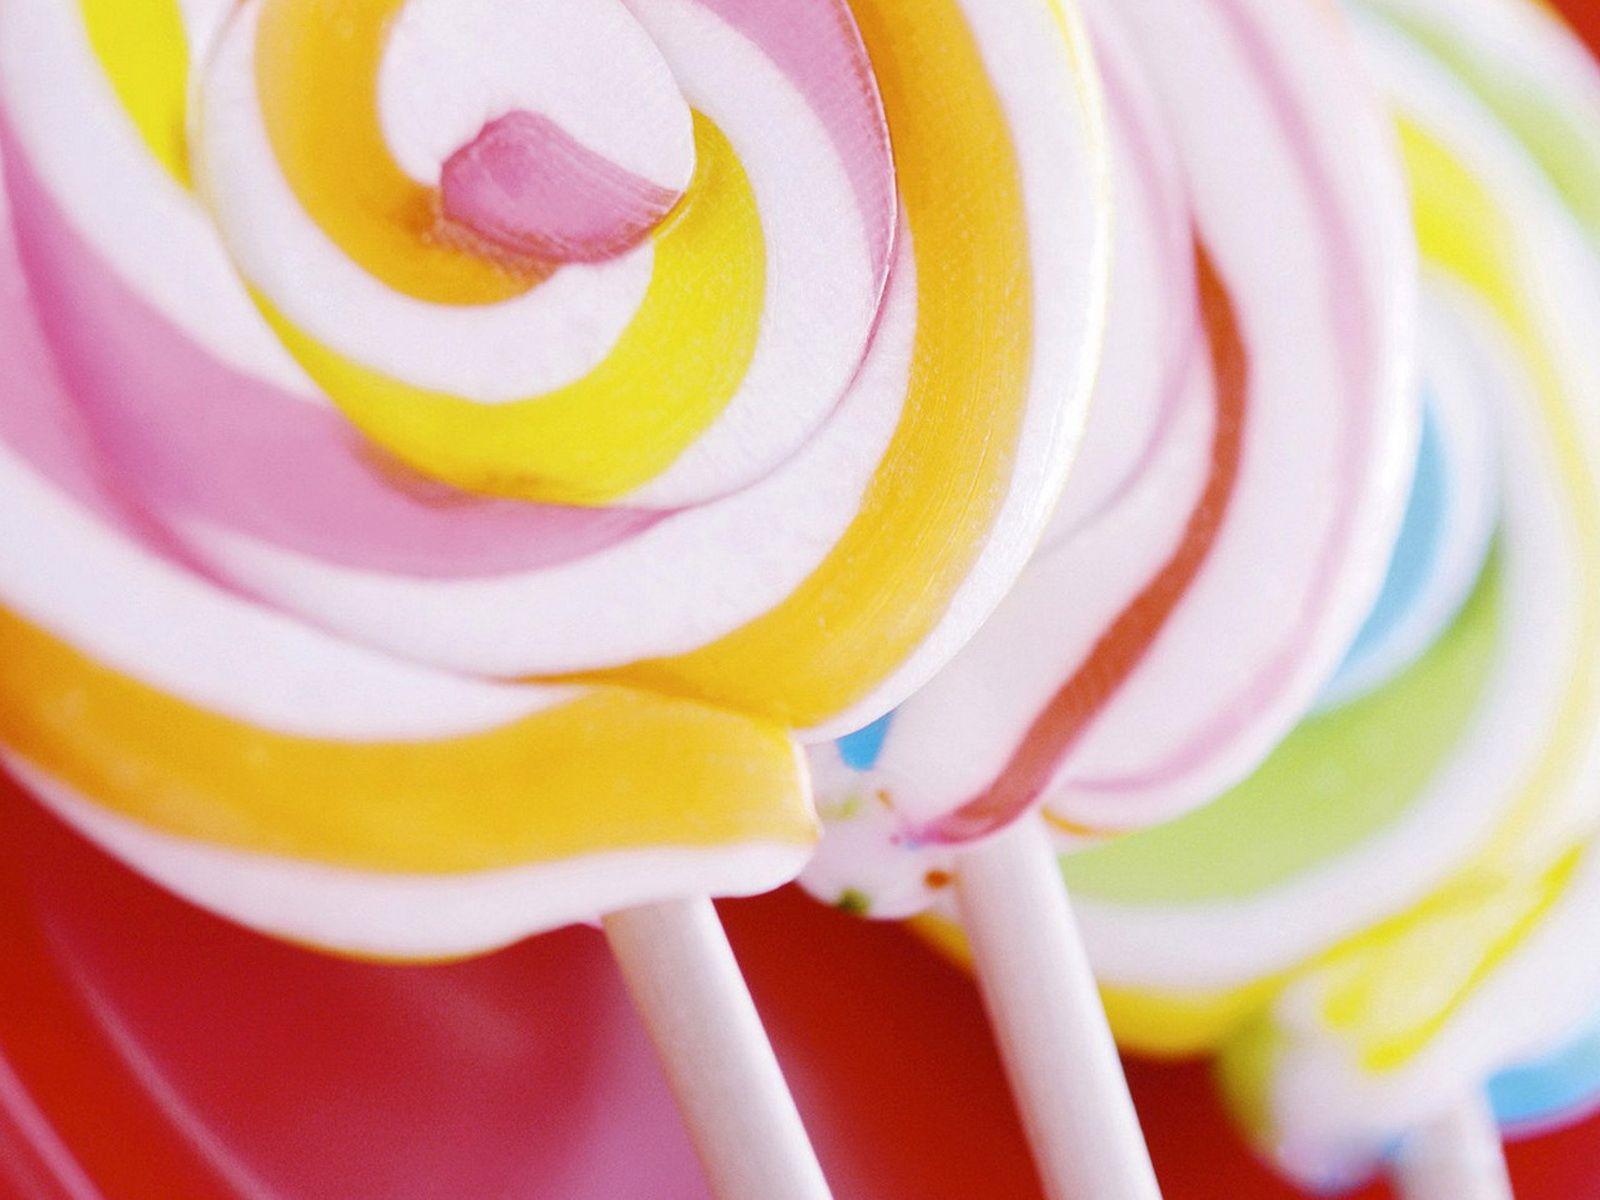 You can download Lollipop HD Wallpaper here. Lollipop HD Wallpaper